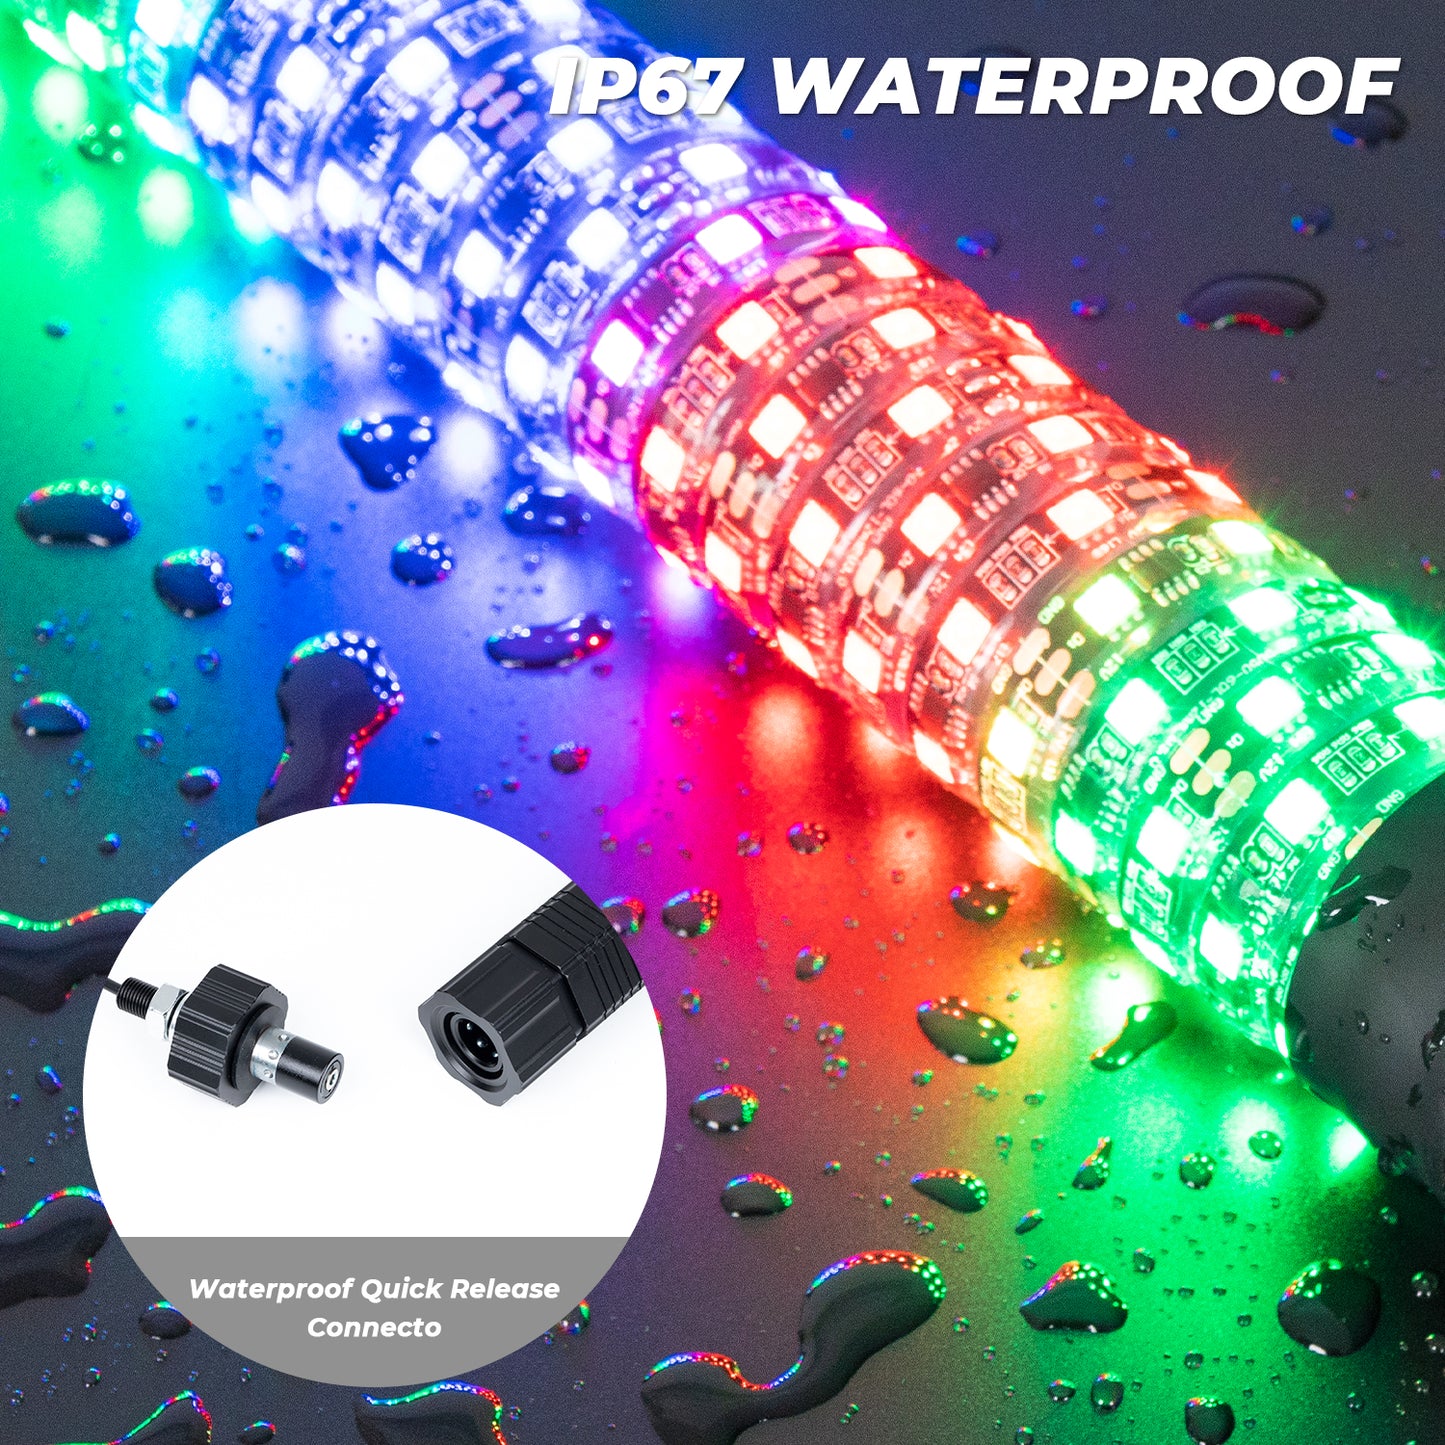 2FT/3FT Pair of RGB Chasing Fat Whips Lights with Bluetooth and Remote